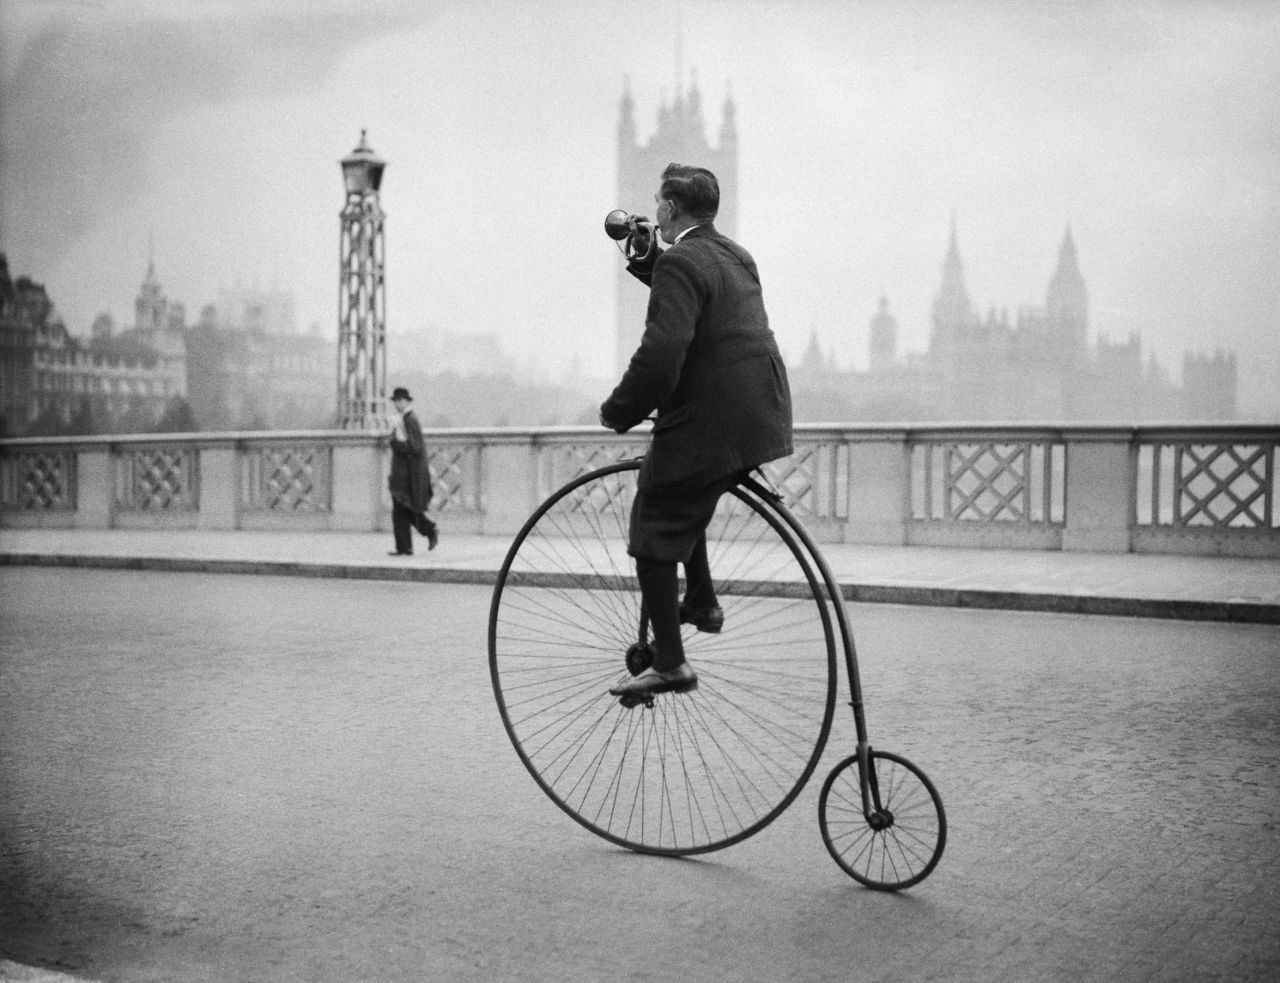 Lambeth Bridge in 1932, featuring a gentleman riding a penny farthing bicycle, he's blowing a bugle to warn people he's coming. 